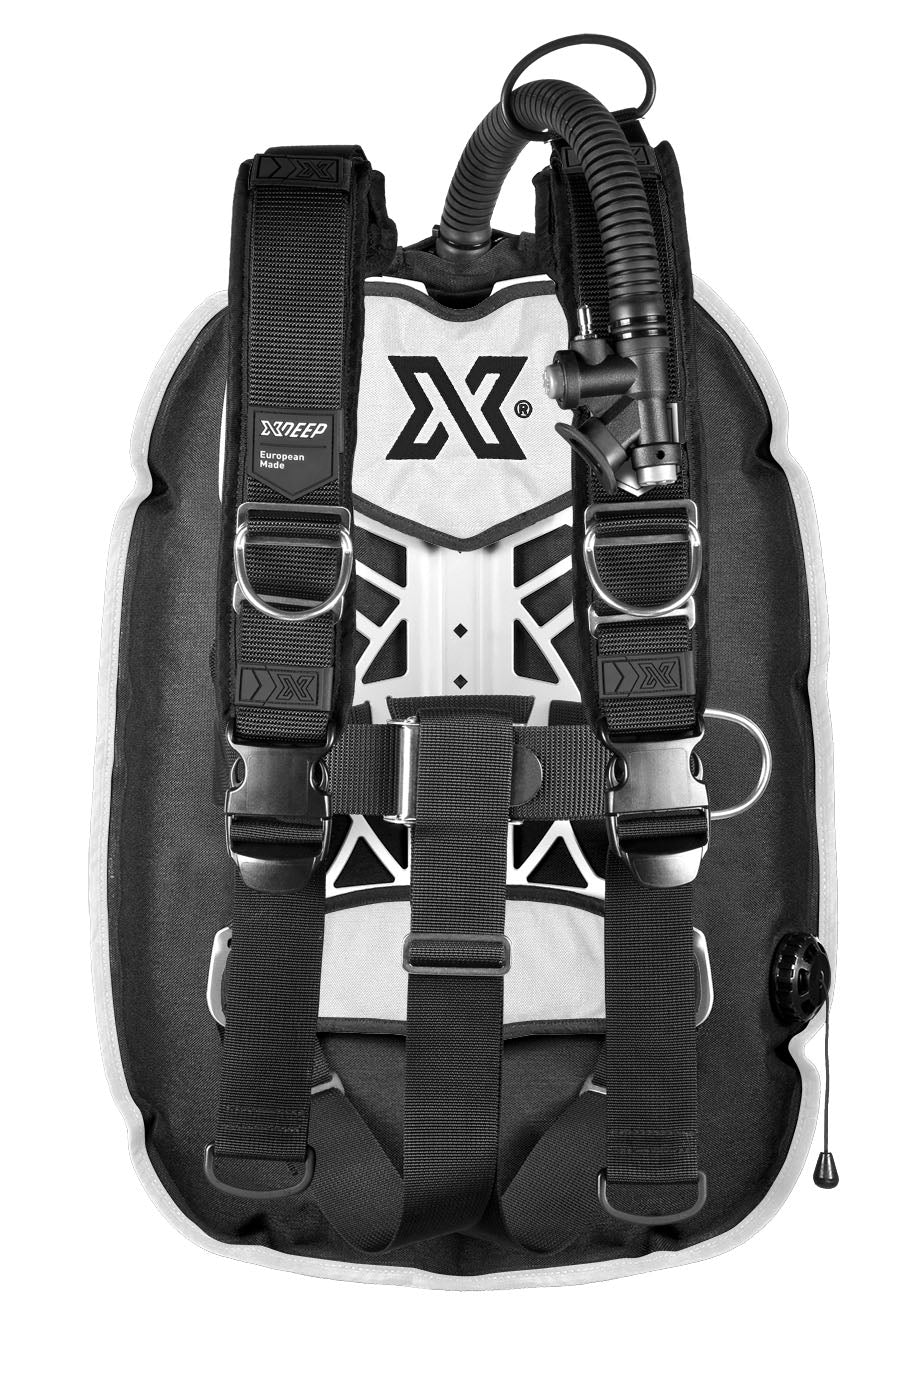 XDEEP XDEEP GHOST Full Setup with Standard or Deluxe harness White / Deluxe / Small - Oyster Diving